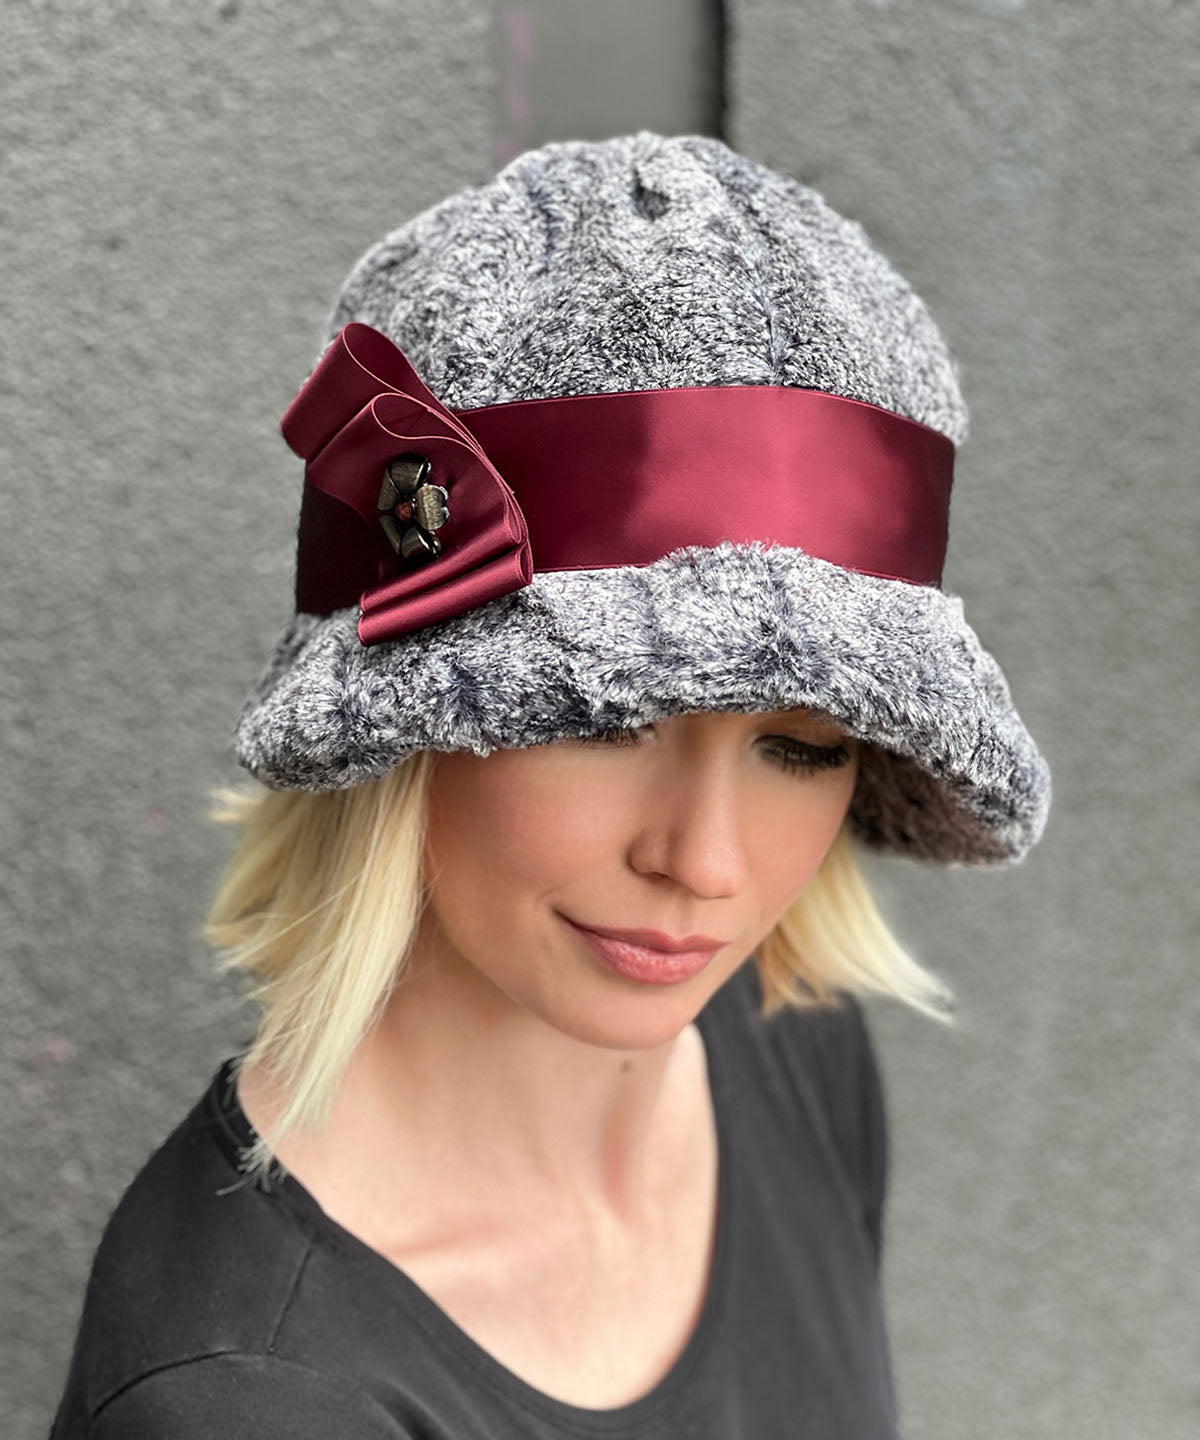 Grace Cloche Hat - Nimbus Faux Fur with Burgundy Satin Bow and Flower Button  - Handmade in USA by Pandemonium Millinery